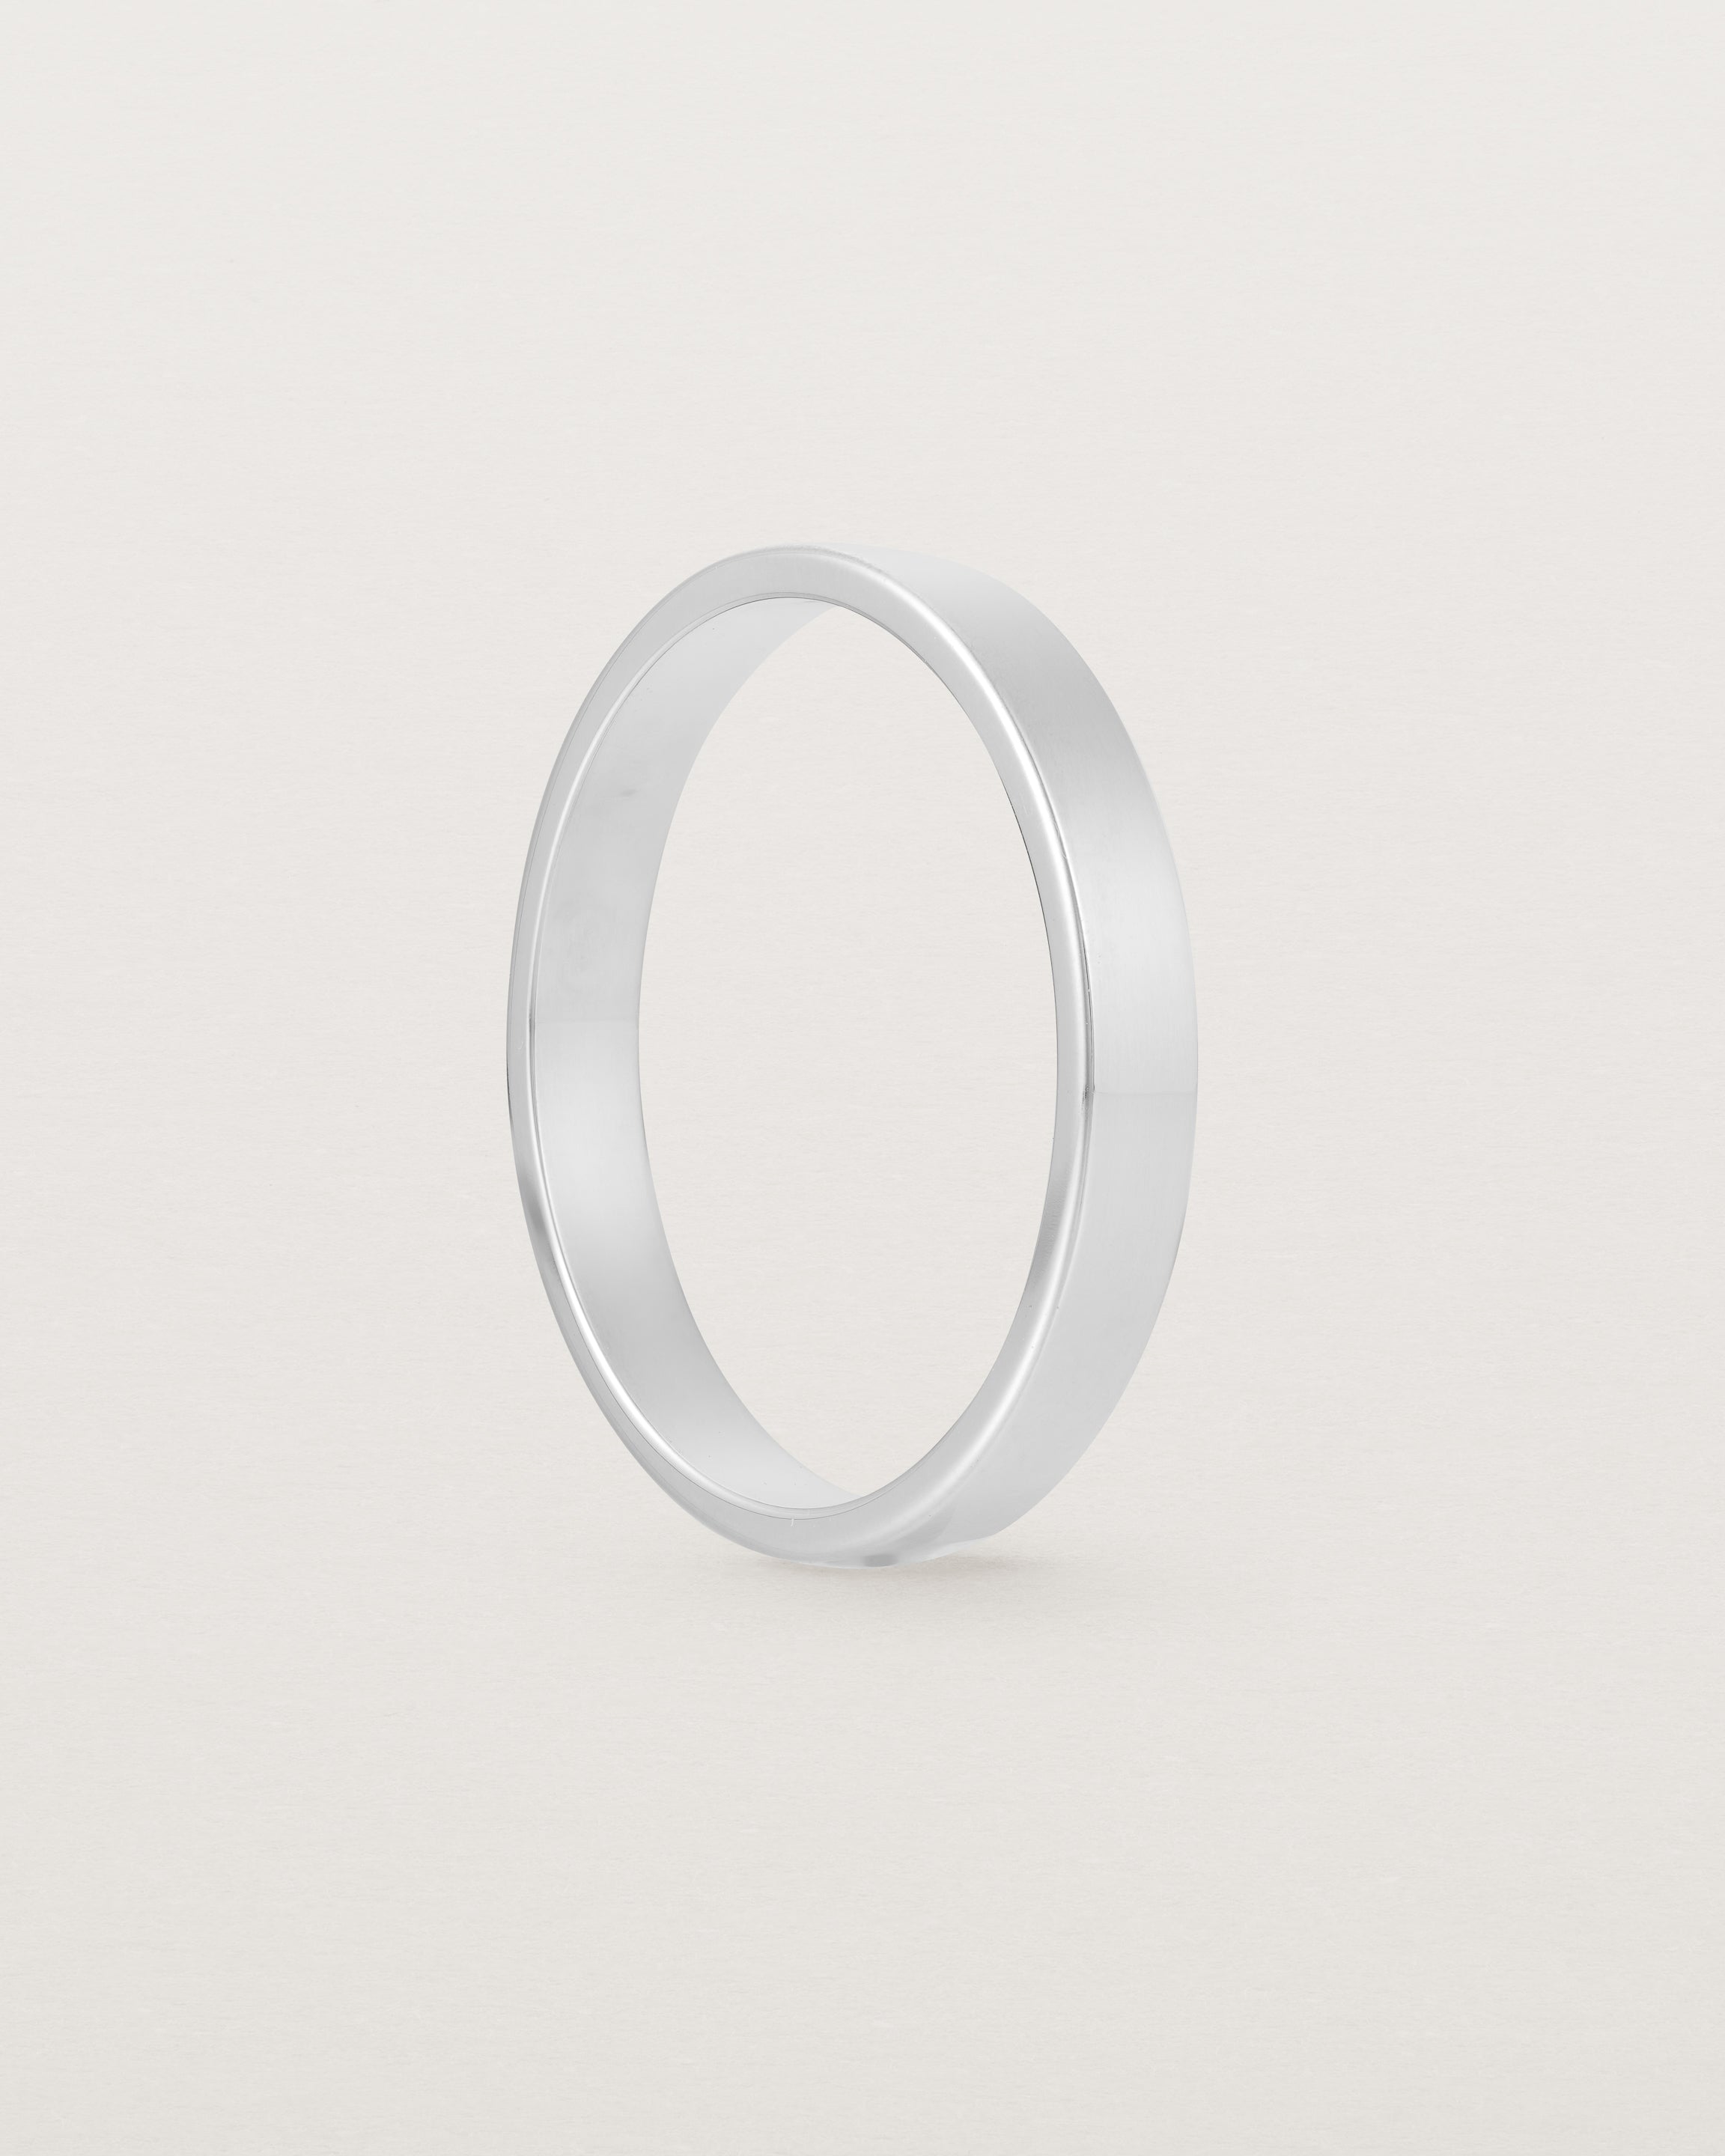 The side profile of our square, flat 3mm profile wedding band crafted in sterling silver